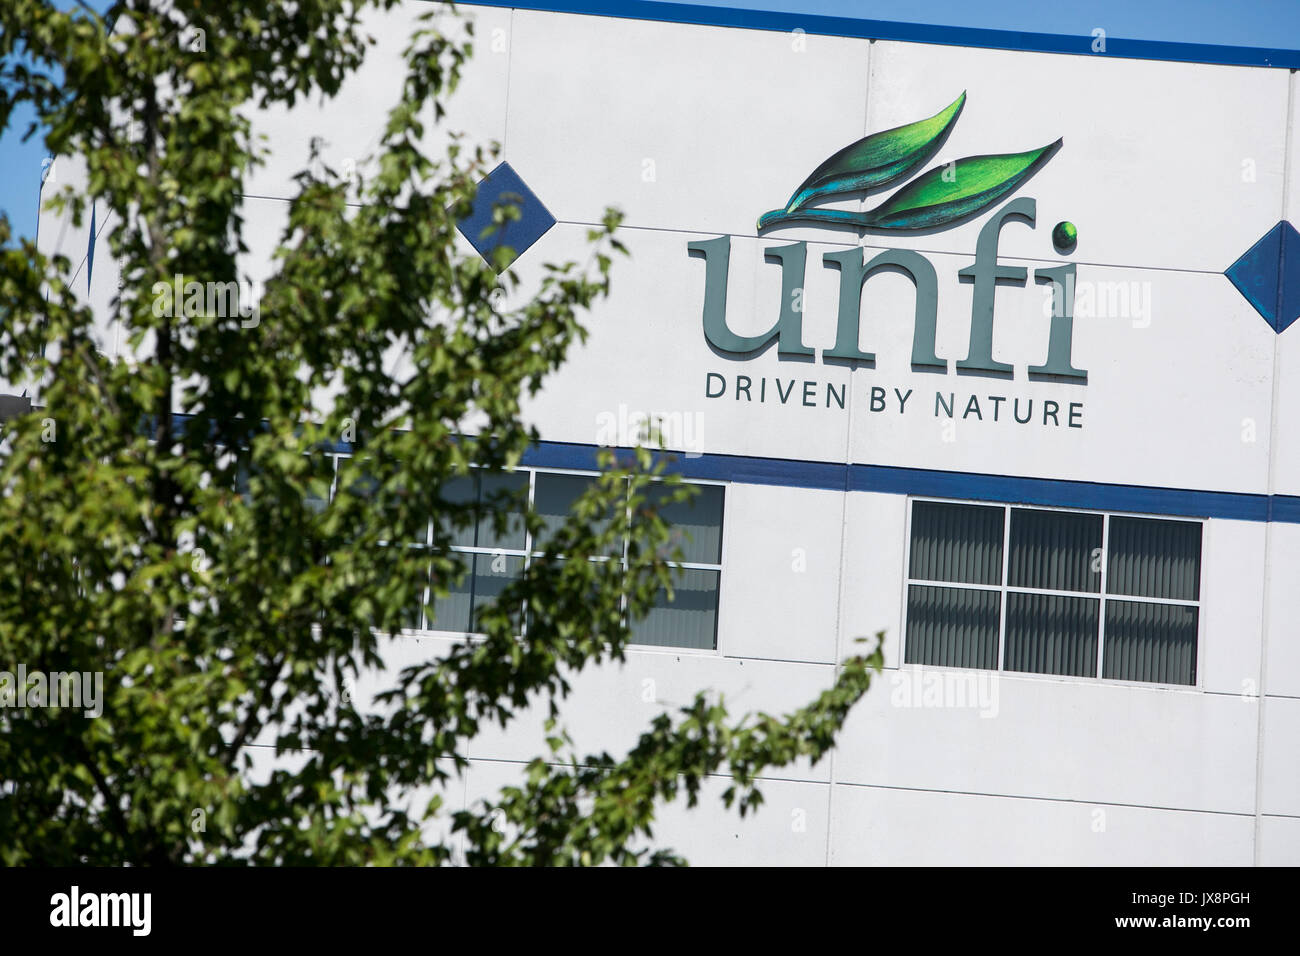 A logo sign outside of a facility occupied by United Natural Foods (UNFI) in York, Pennsylvania on July 30, 2017. Stock Photo